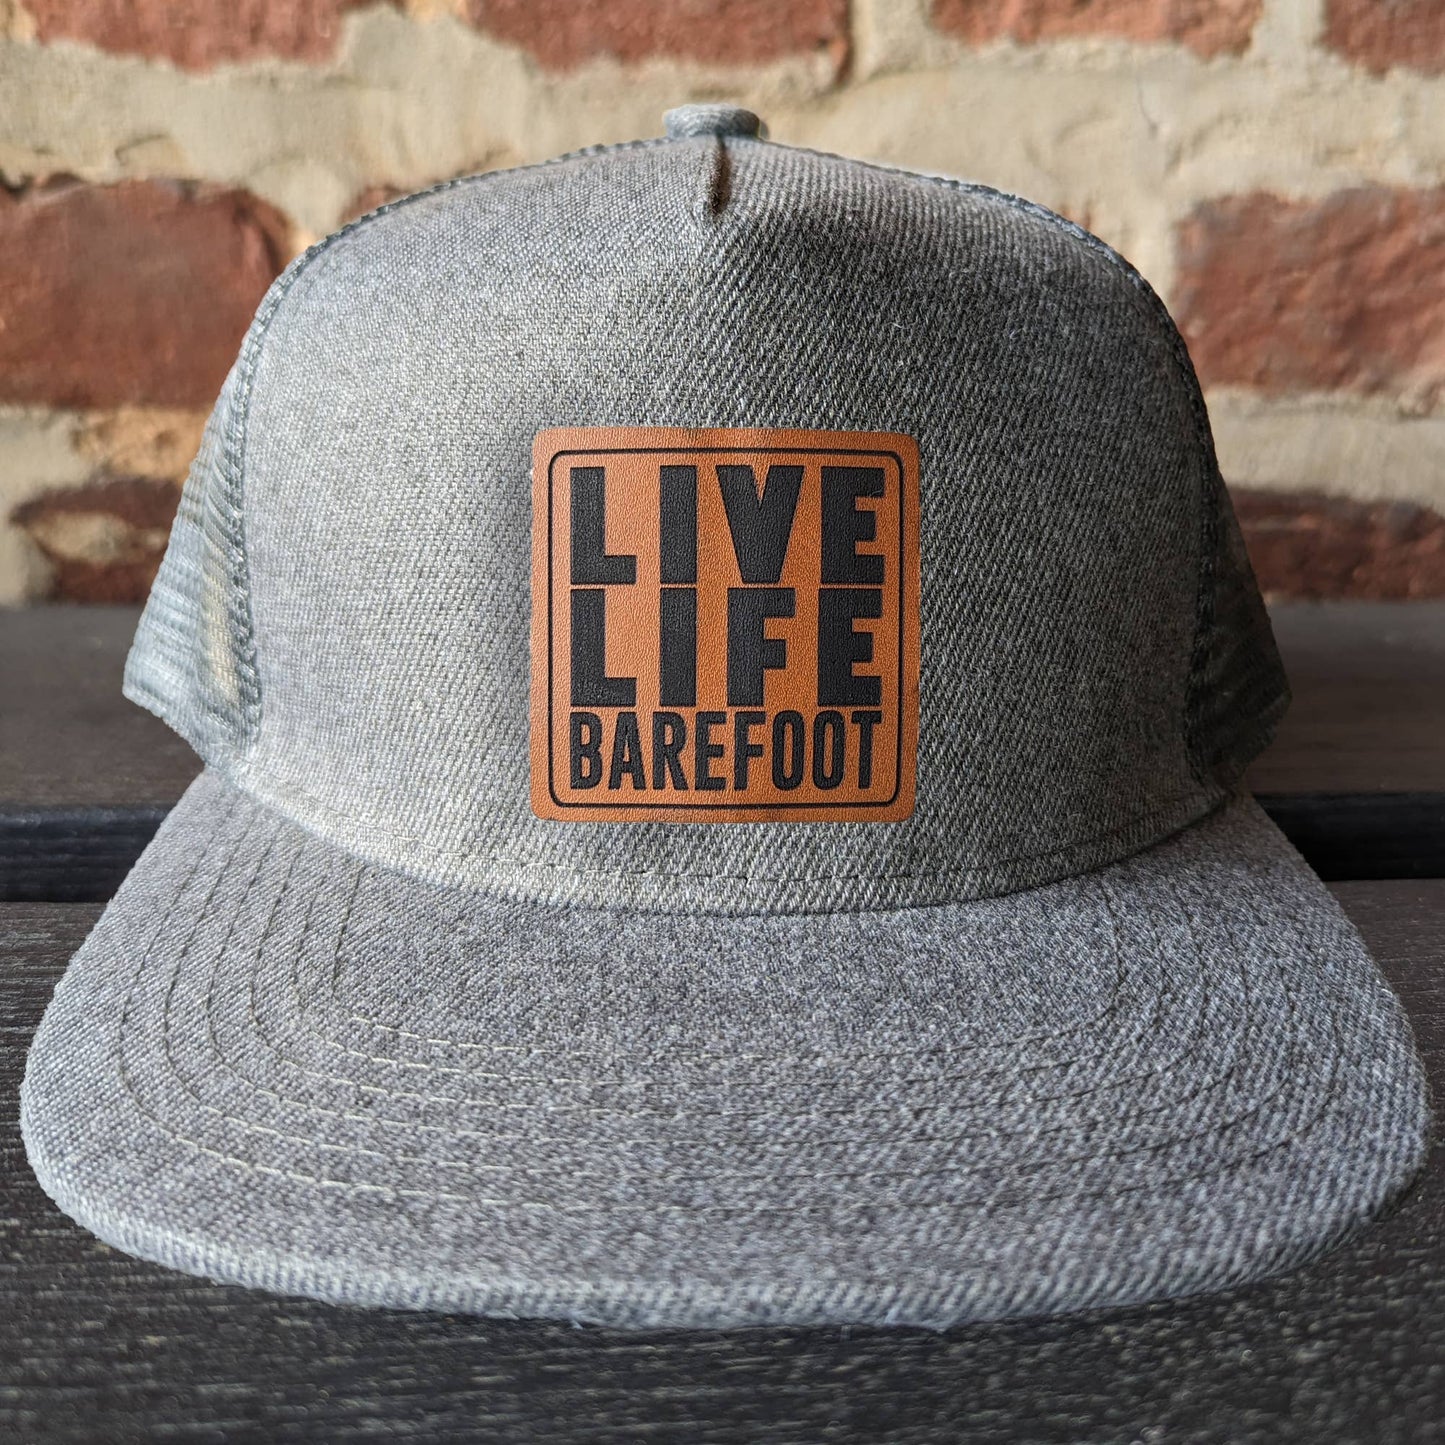 YOUTH "Live life Barefoot" Charcoal Mesh Snapback Hat